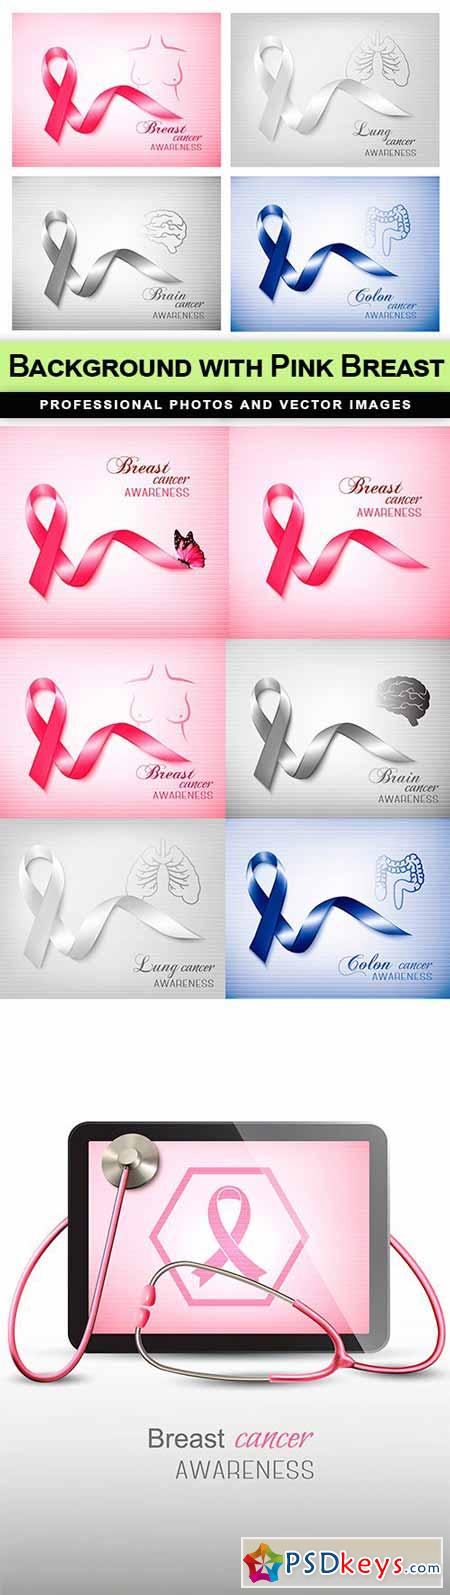 Background with Pink Breast - 8 EPS